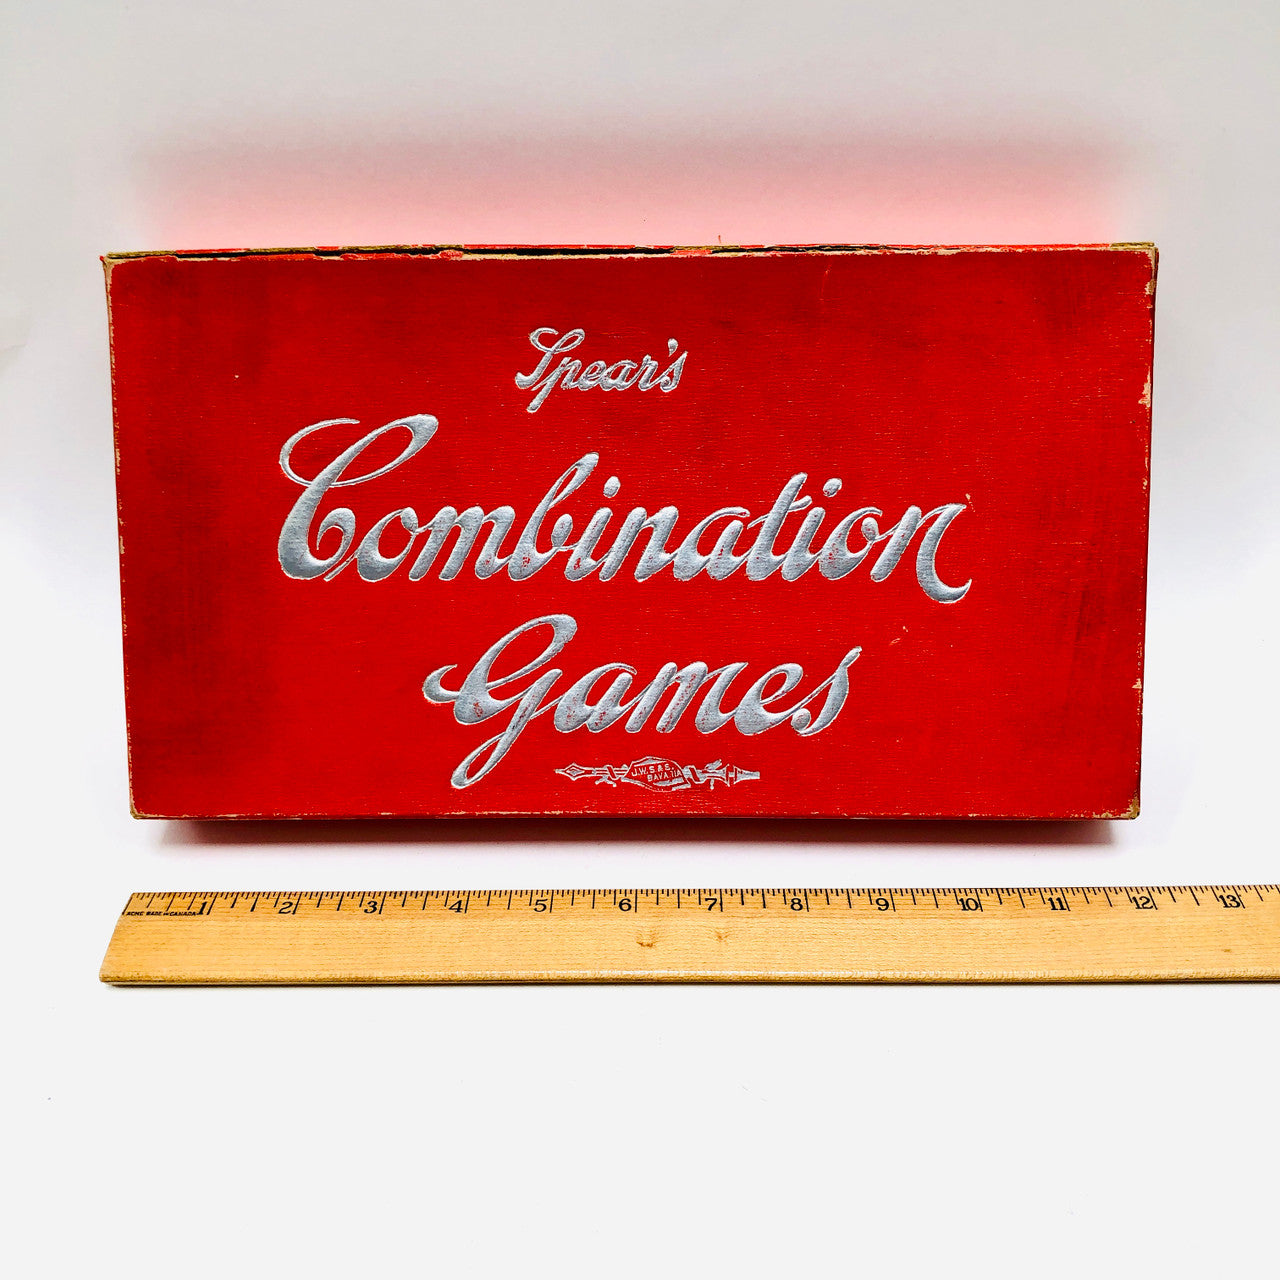 Vintage, Combination, Board Games, Spear's Combination Games, J W S Bavaria